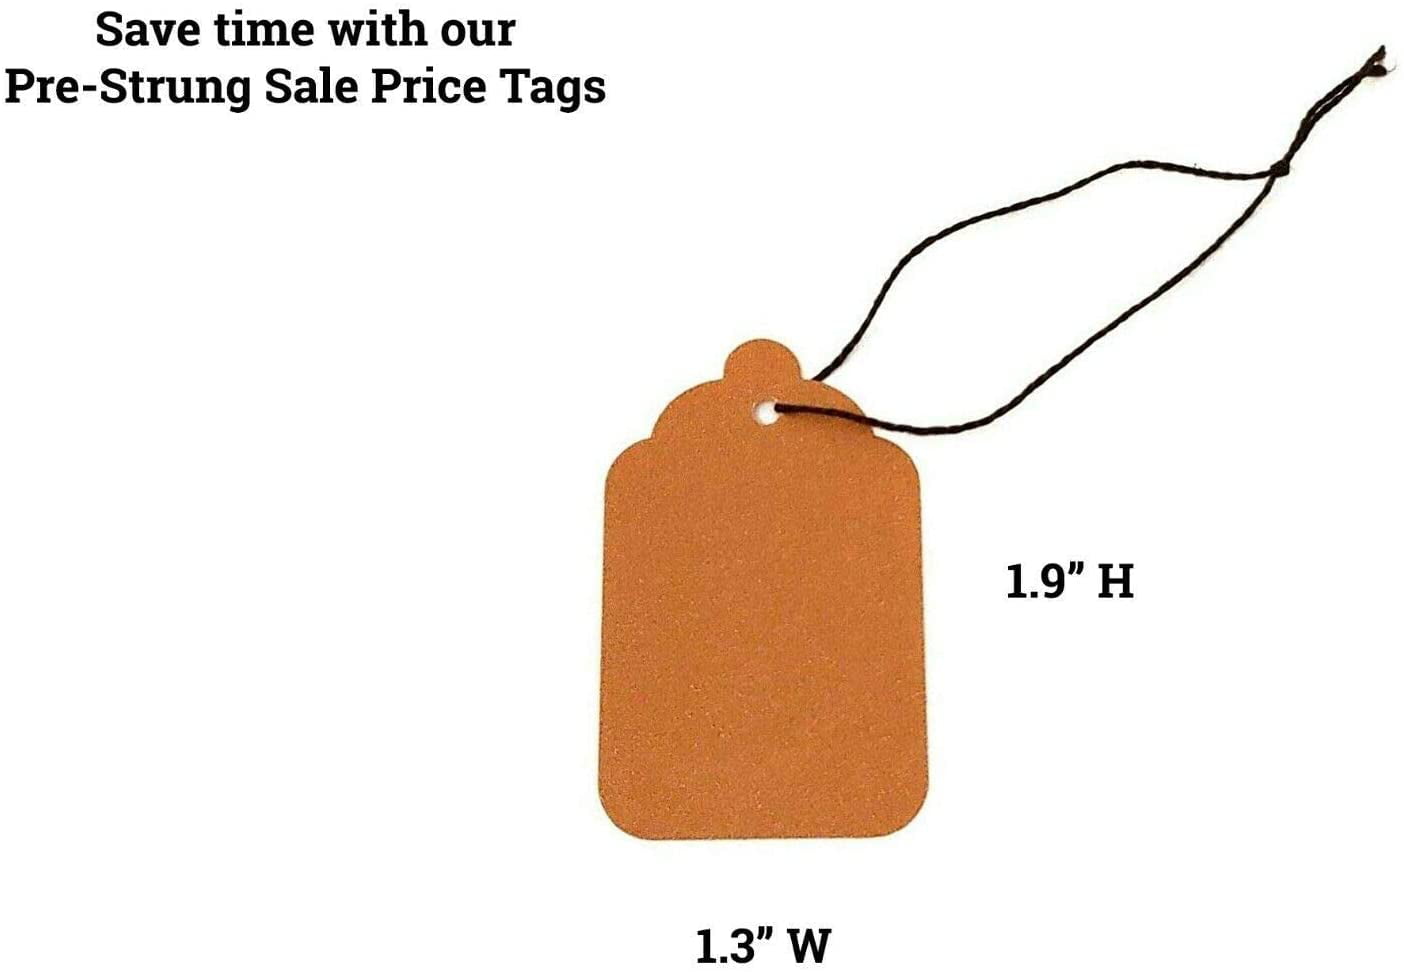 Kraft Paper Gift Tags with String, 500Pcs Blank Writable Tags